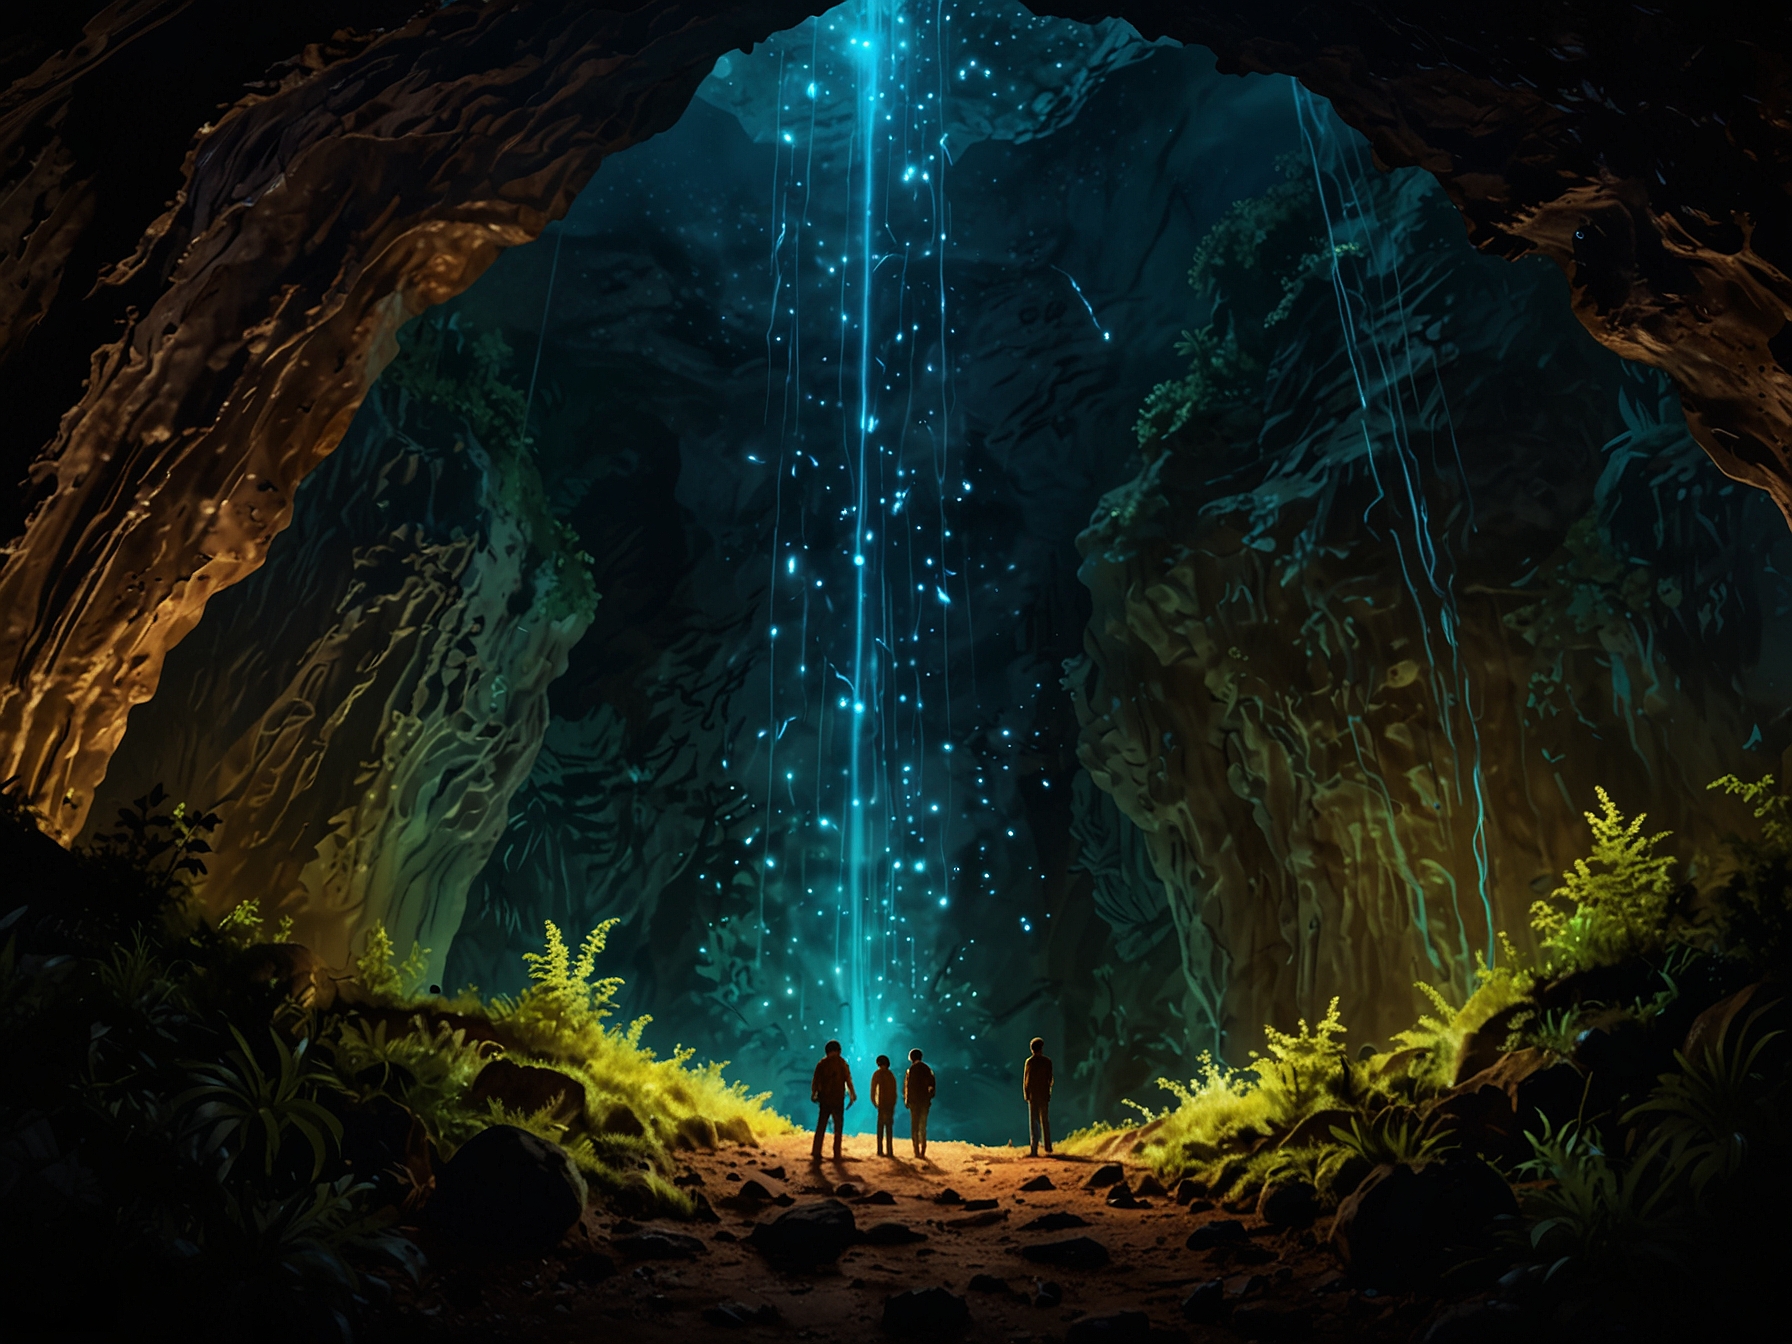 A panoramic view inside the Waitomo Caves showcases its stunning glowworms, lighting up the cavern like a starry sky. MrBeast and his crew are seen marveling at the unique natural phenomenon, creating engaging video content.